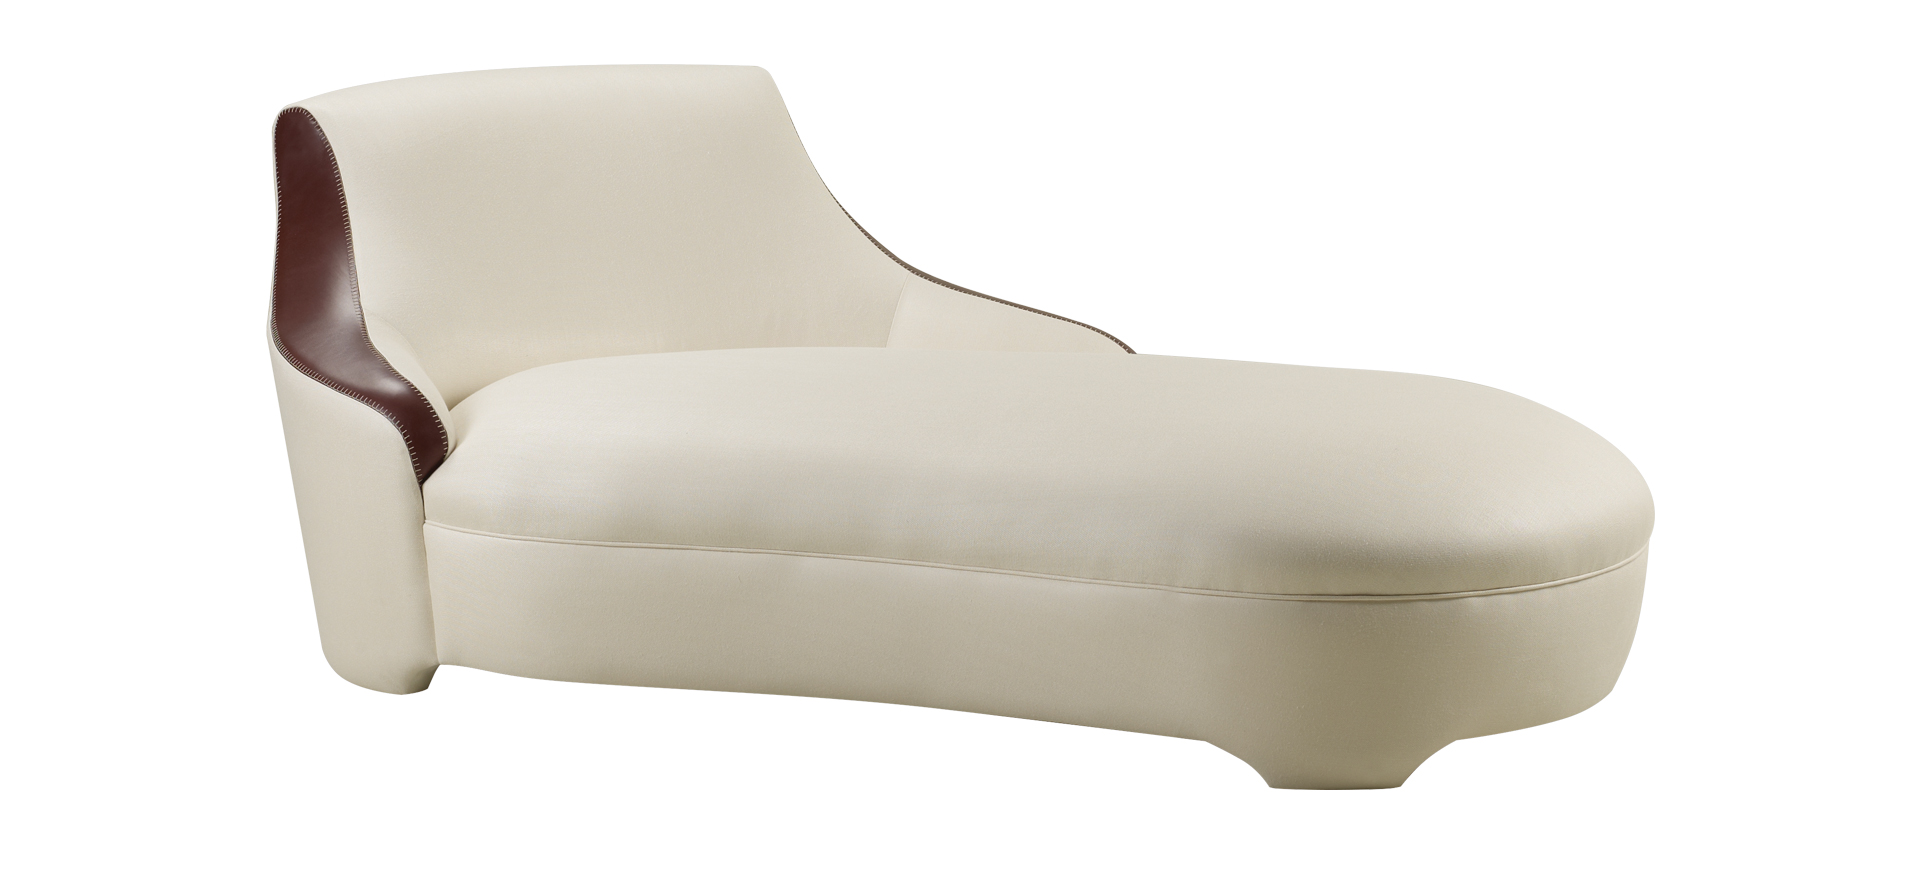 /mediaGioconda%20is%20a%20chaise%20longue%20convered%20in%20fabric%20with%20leather%20details,%20from%20Promemoria's%20catalogue%20|%20Promemoria